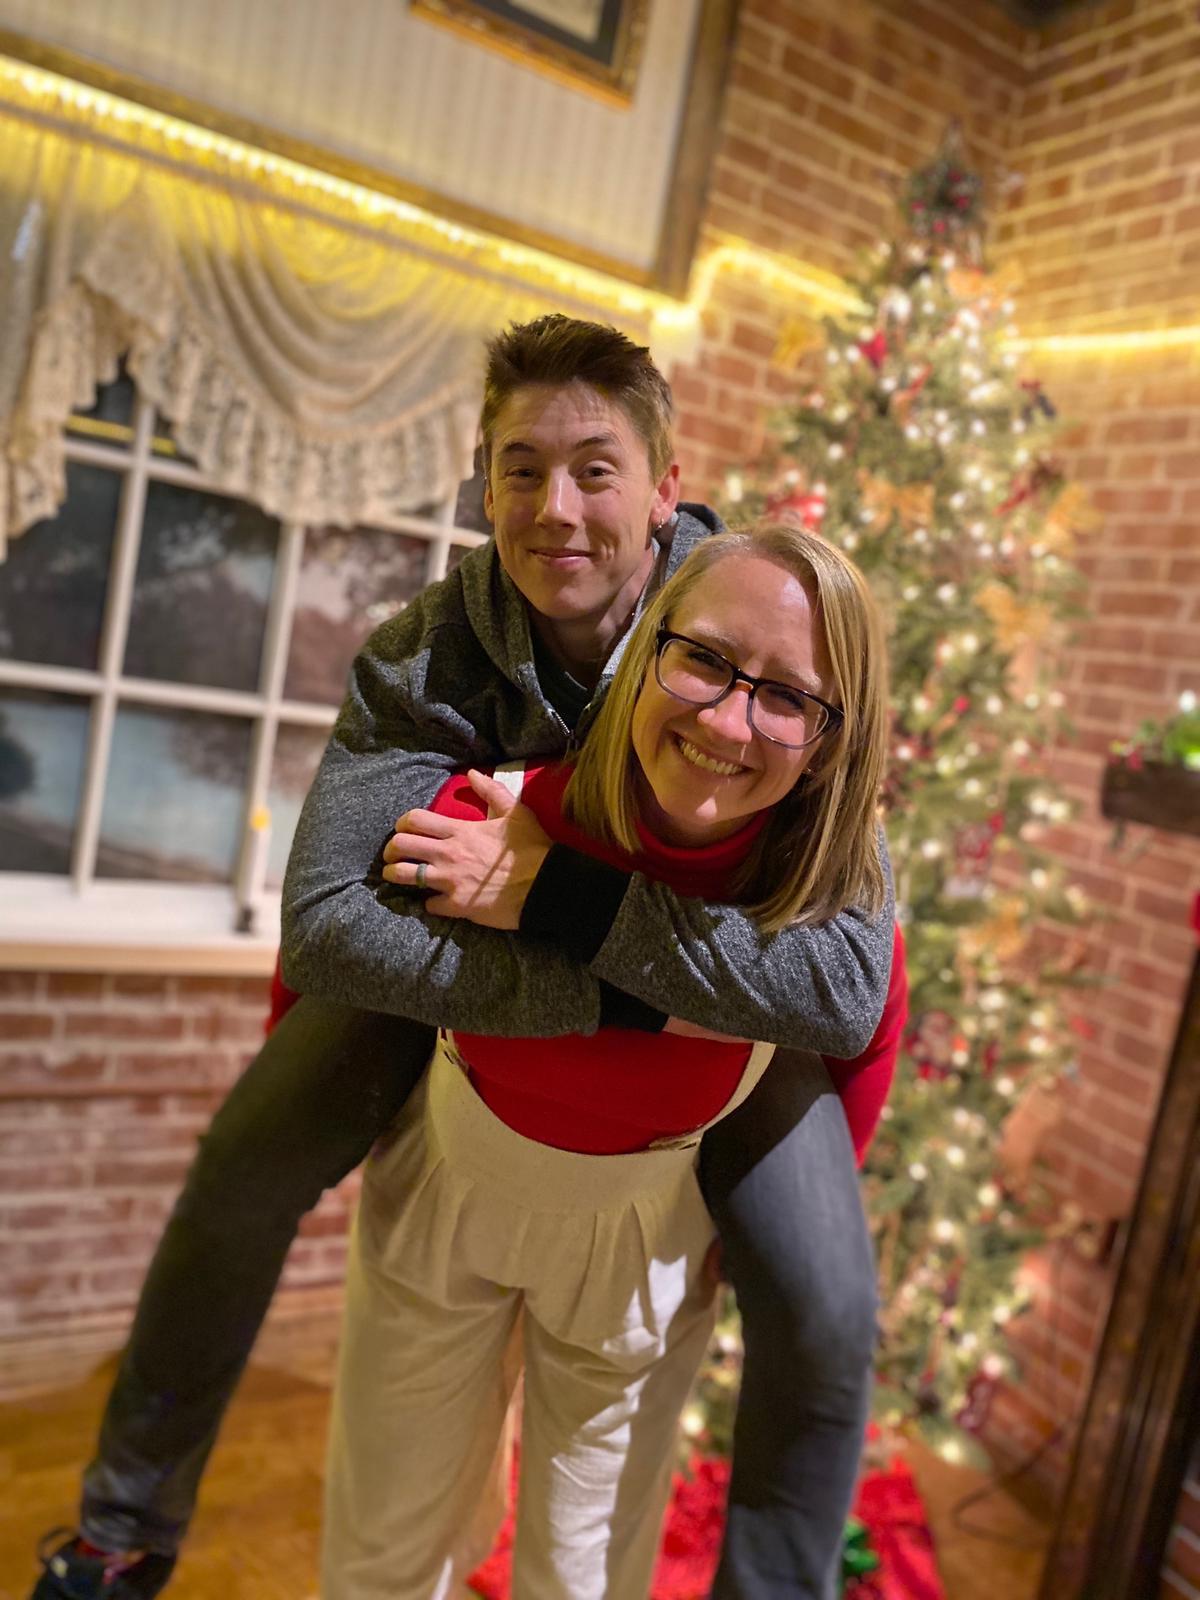 My Wife literally carrying me into 2020!